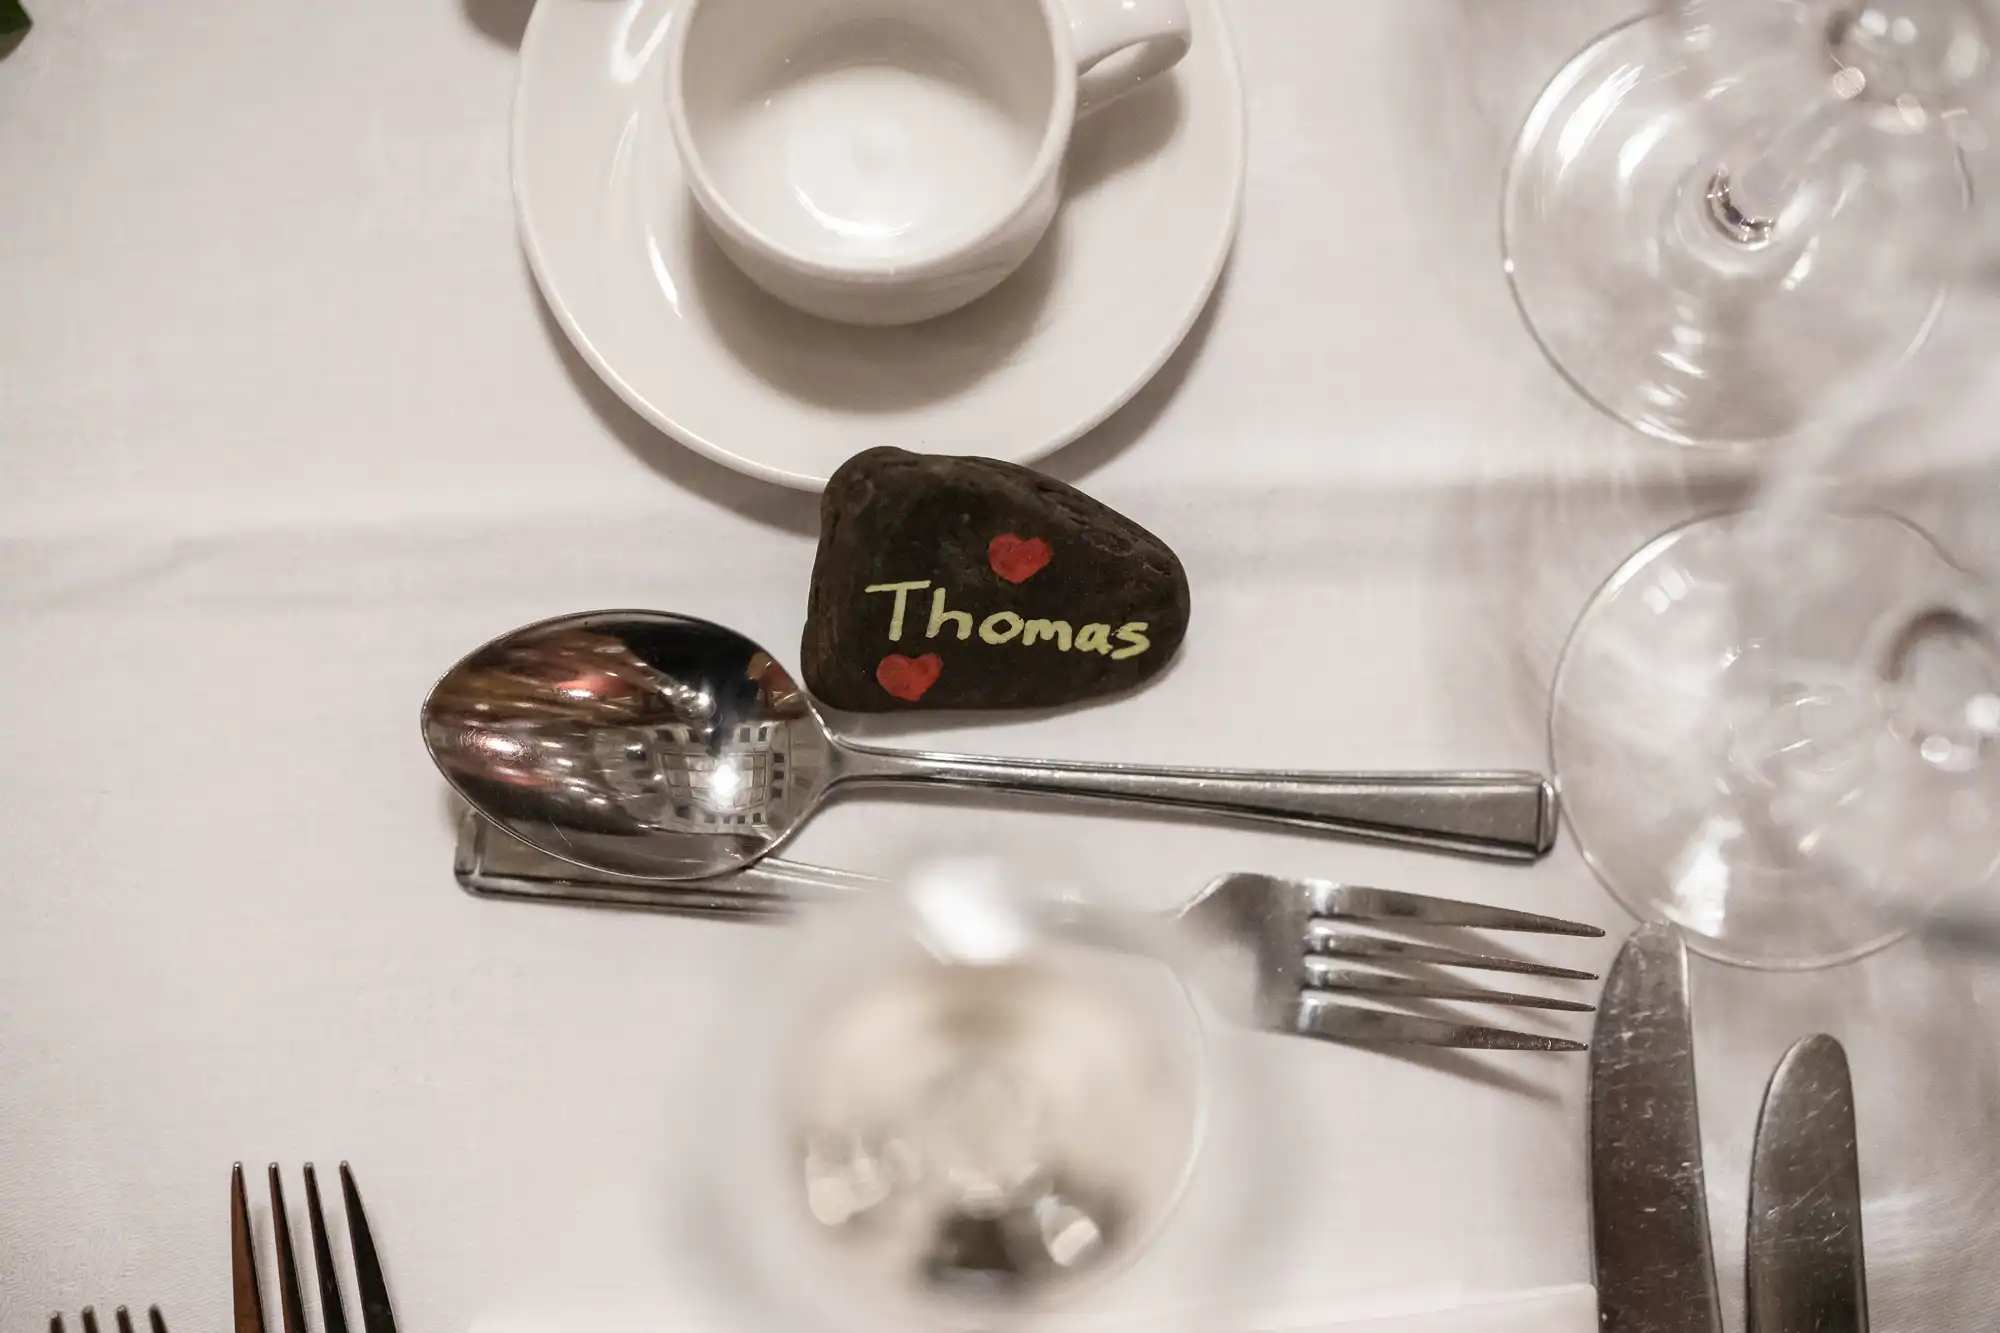 A place setting with a teacup, spoon, fork, and knife on a white tablecloth. A rock with "Thomas" and two red hearts painted on it is placed near the spoon.